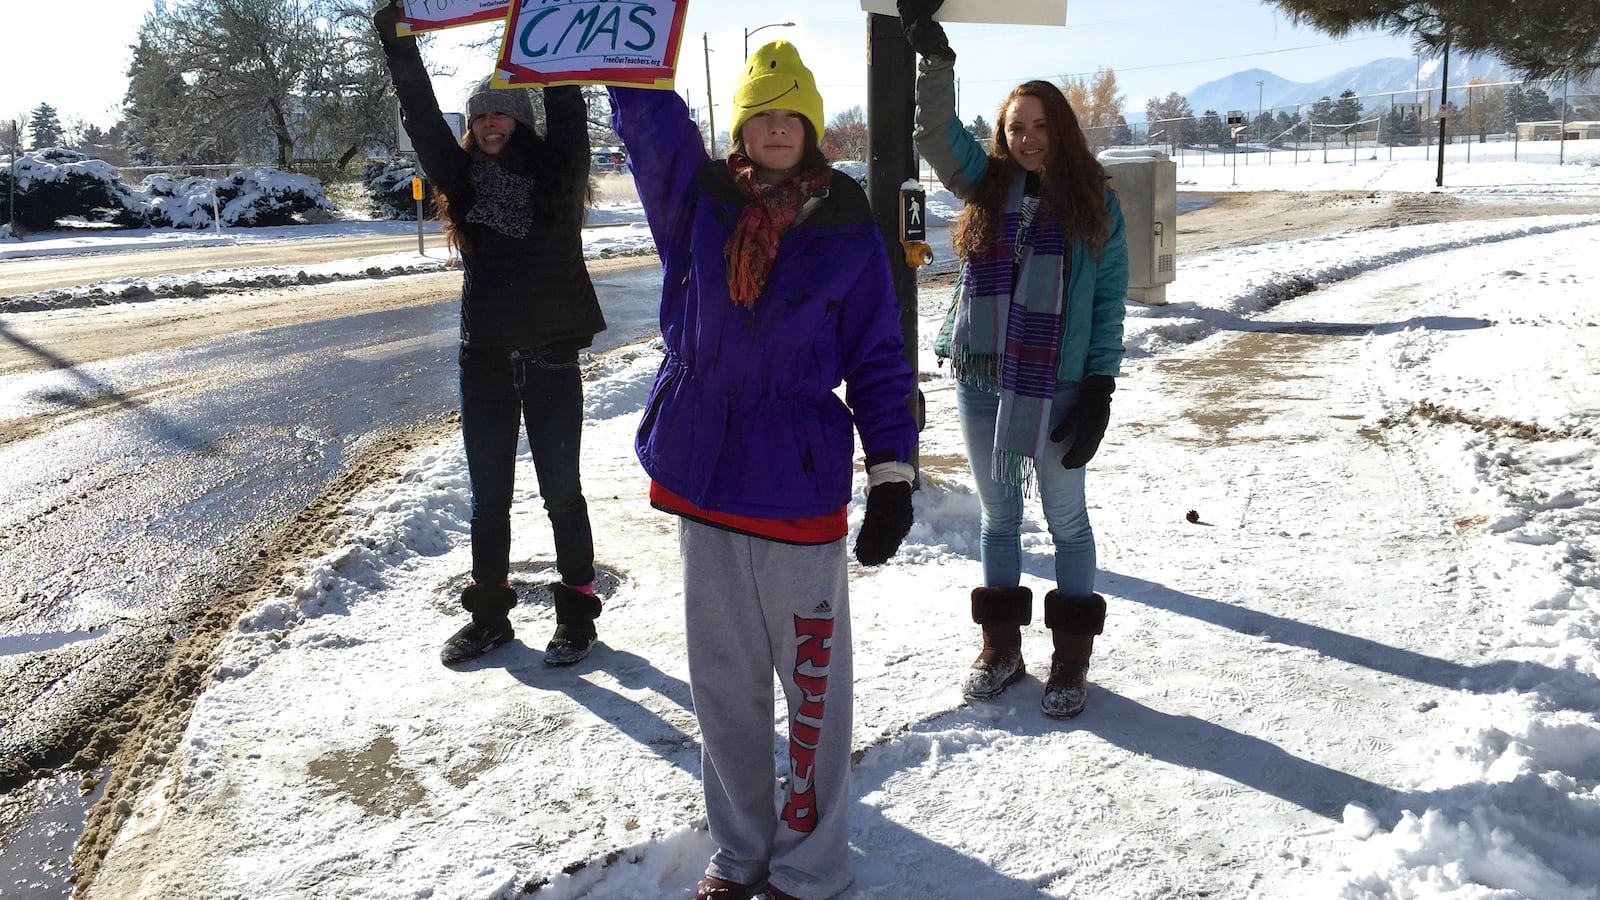 Seniors at Fairview High School in Boulder protested a standardized test in November 2014. (Photo by Nic Garcia/Chalkbeat)